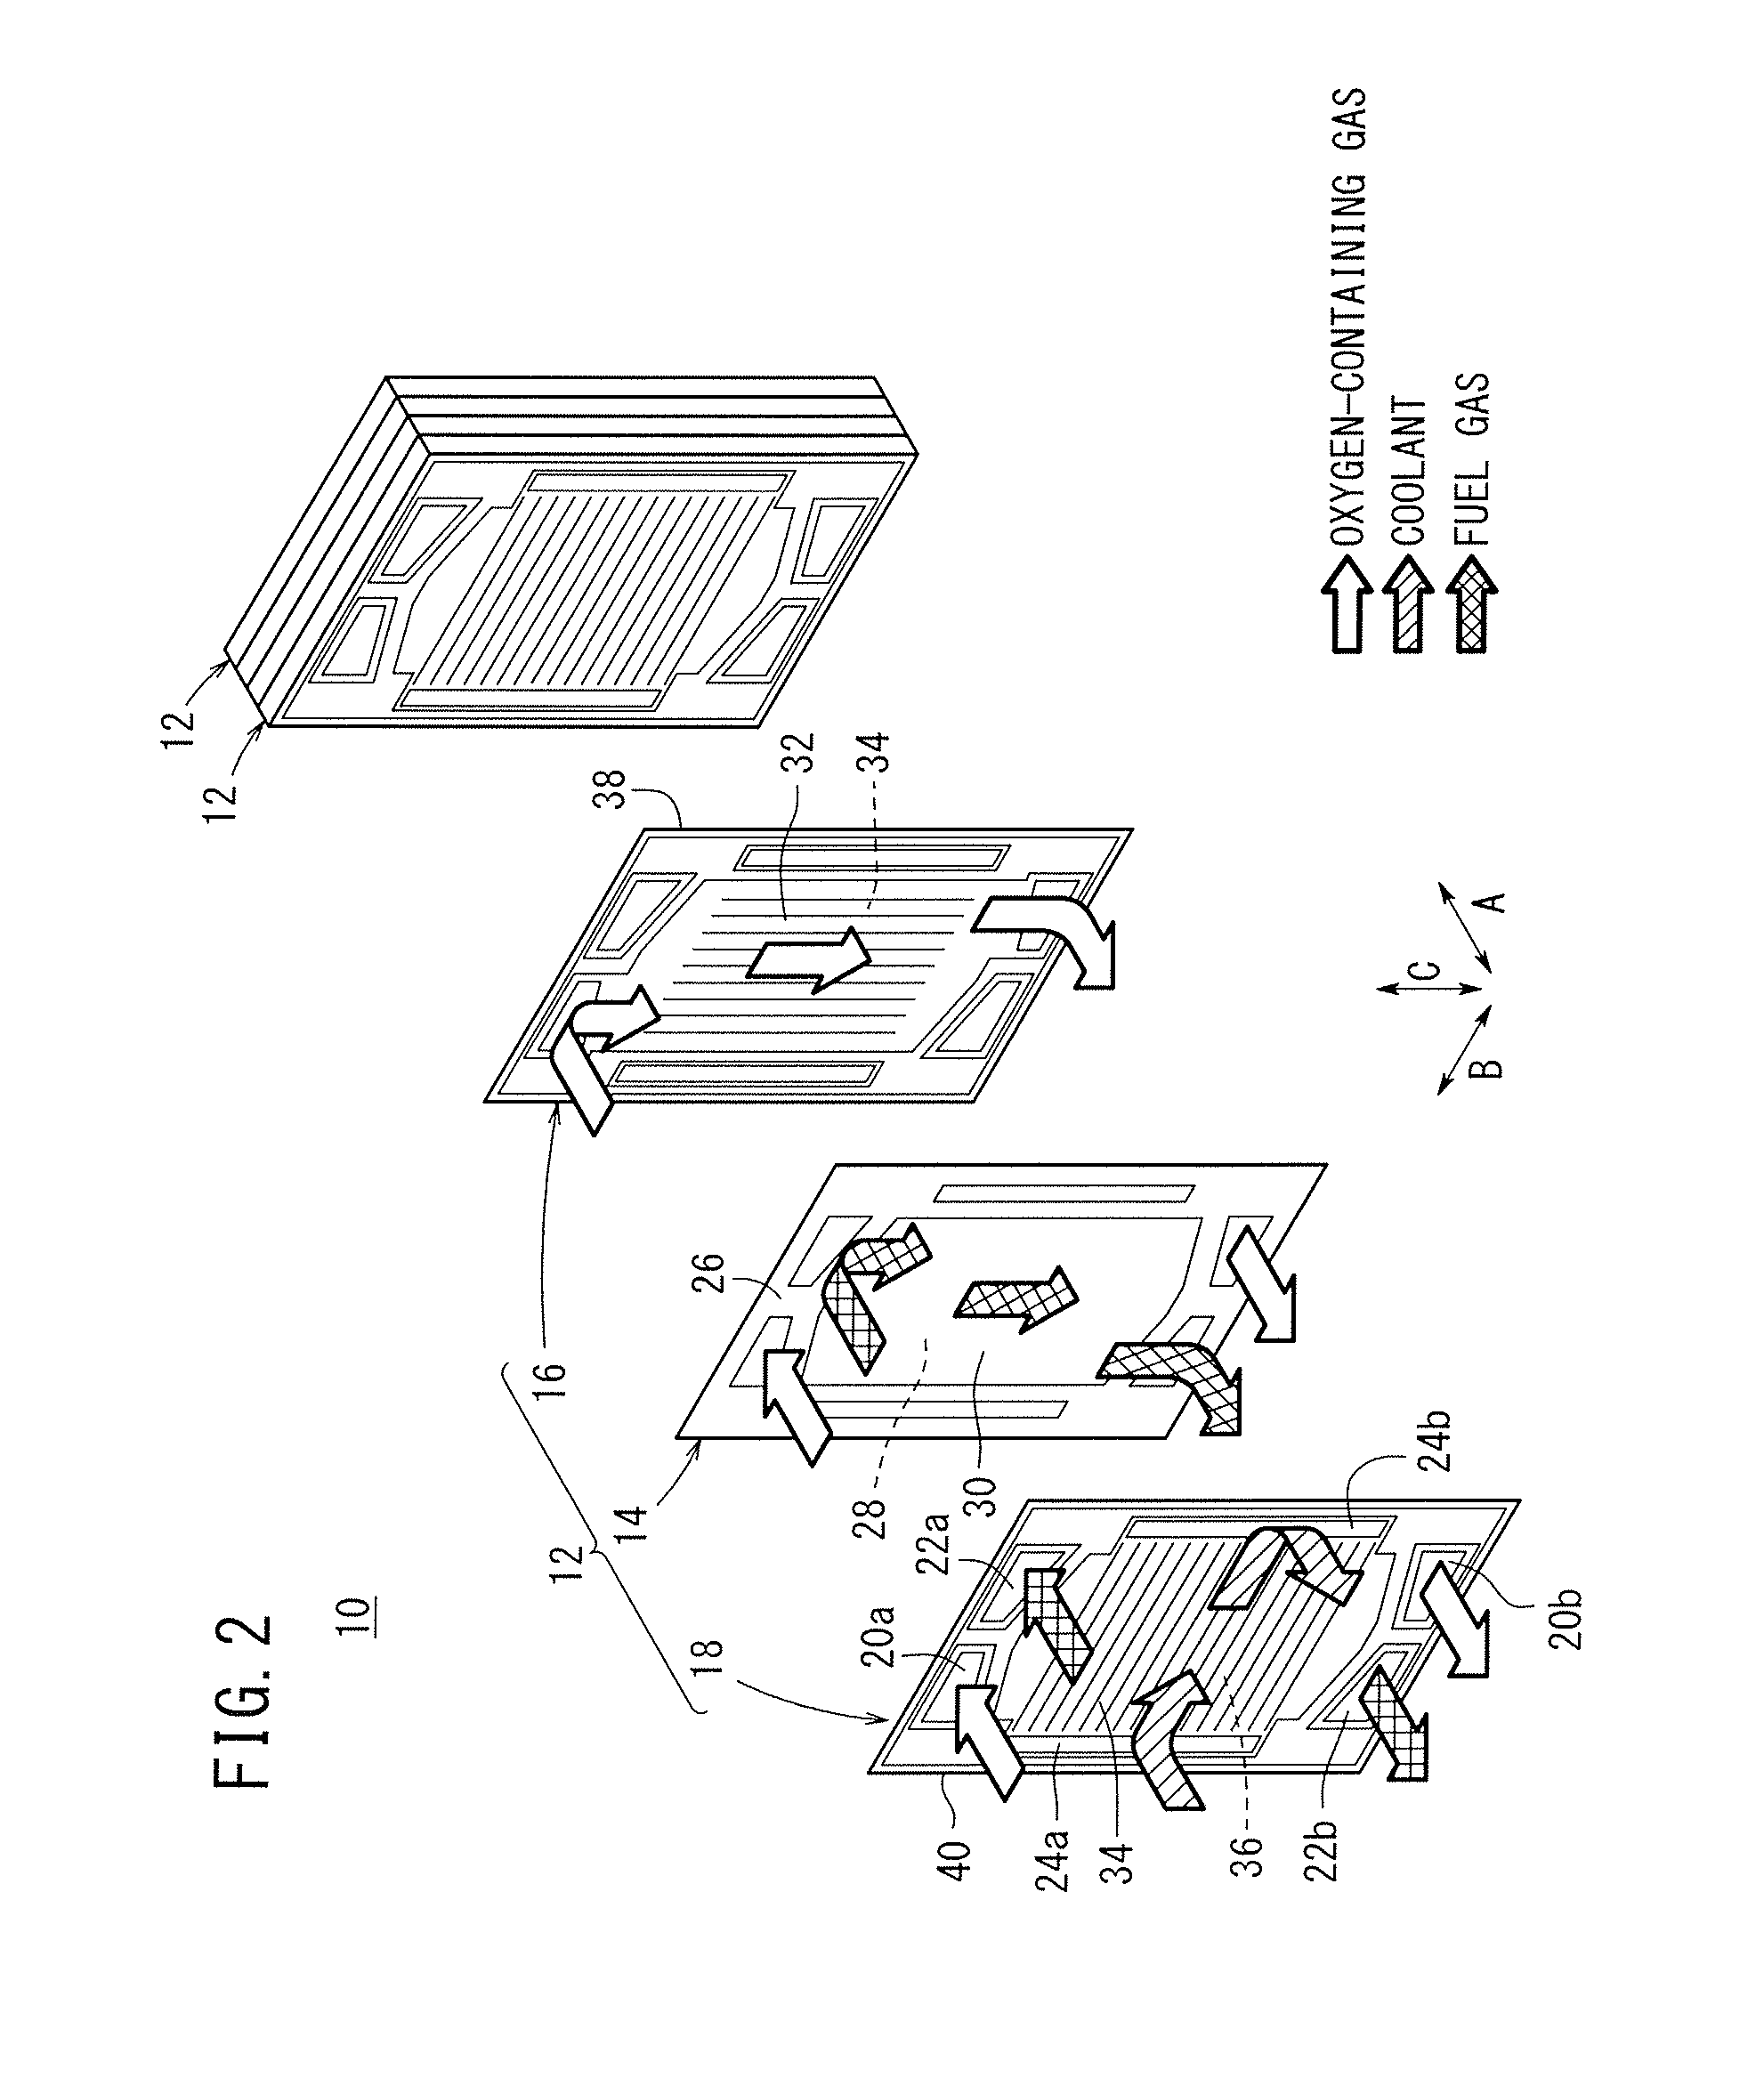 Humidification control method for fuel cell